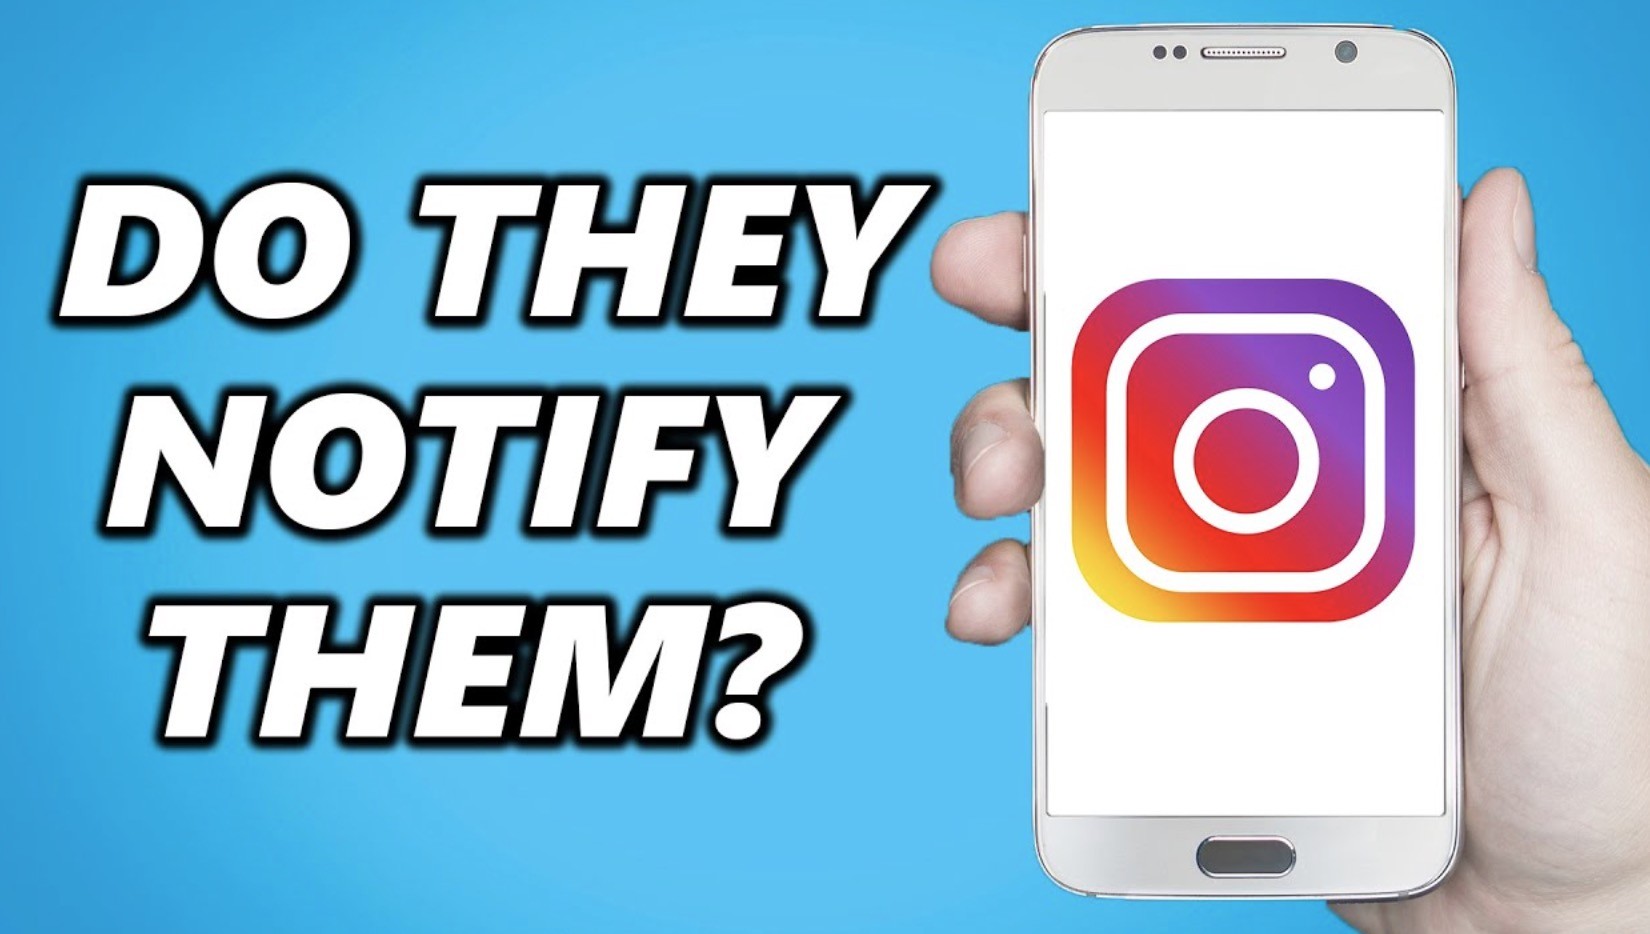 How to Screenshot Instagram Stories Without Notifying User?